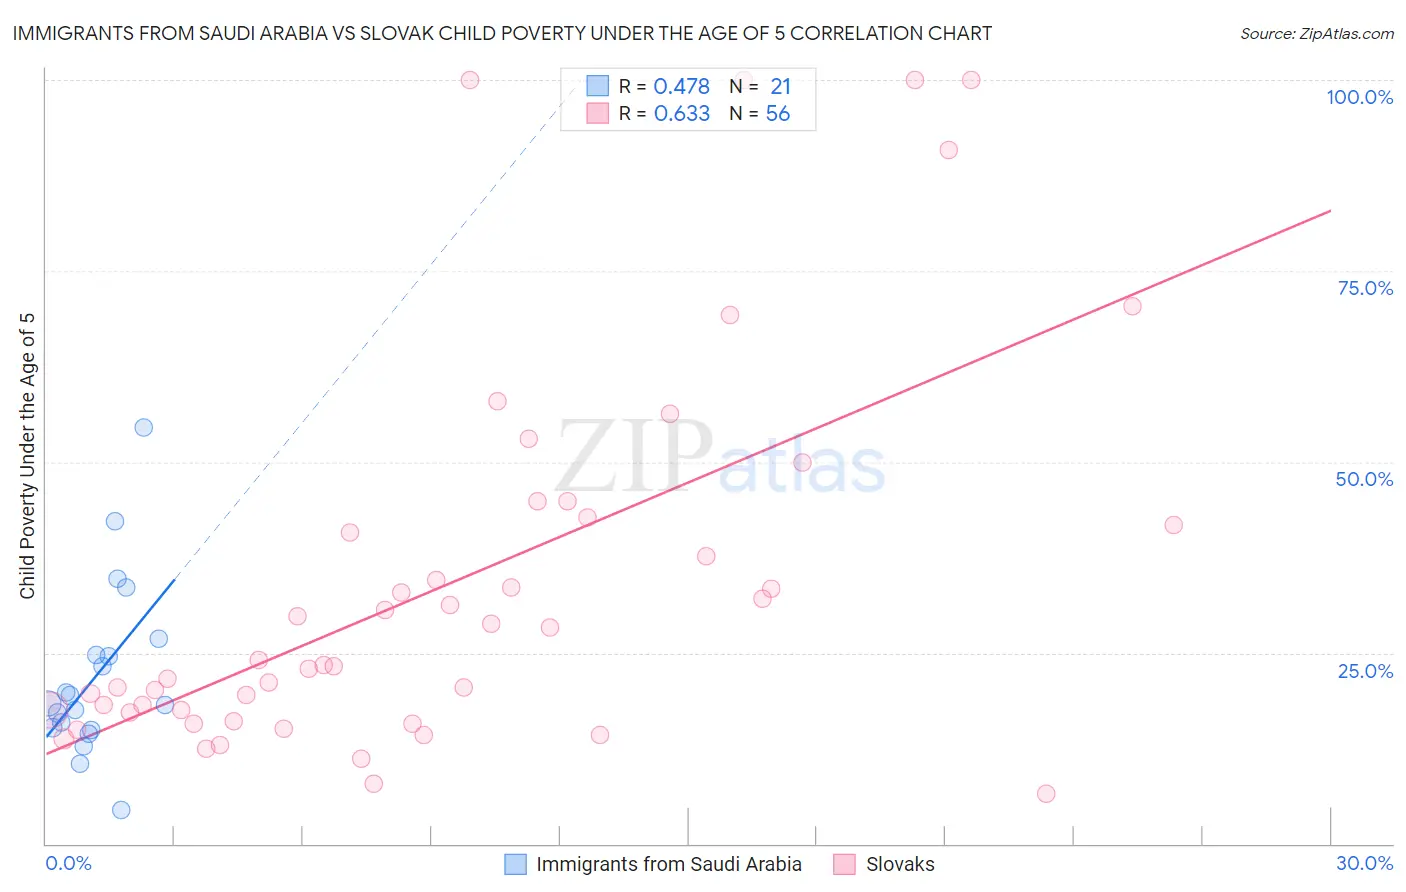 Immigrants from Saudi Arabia vs Slovak Child Poverty Under the Age of 5